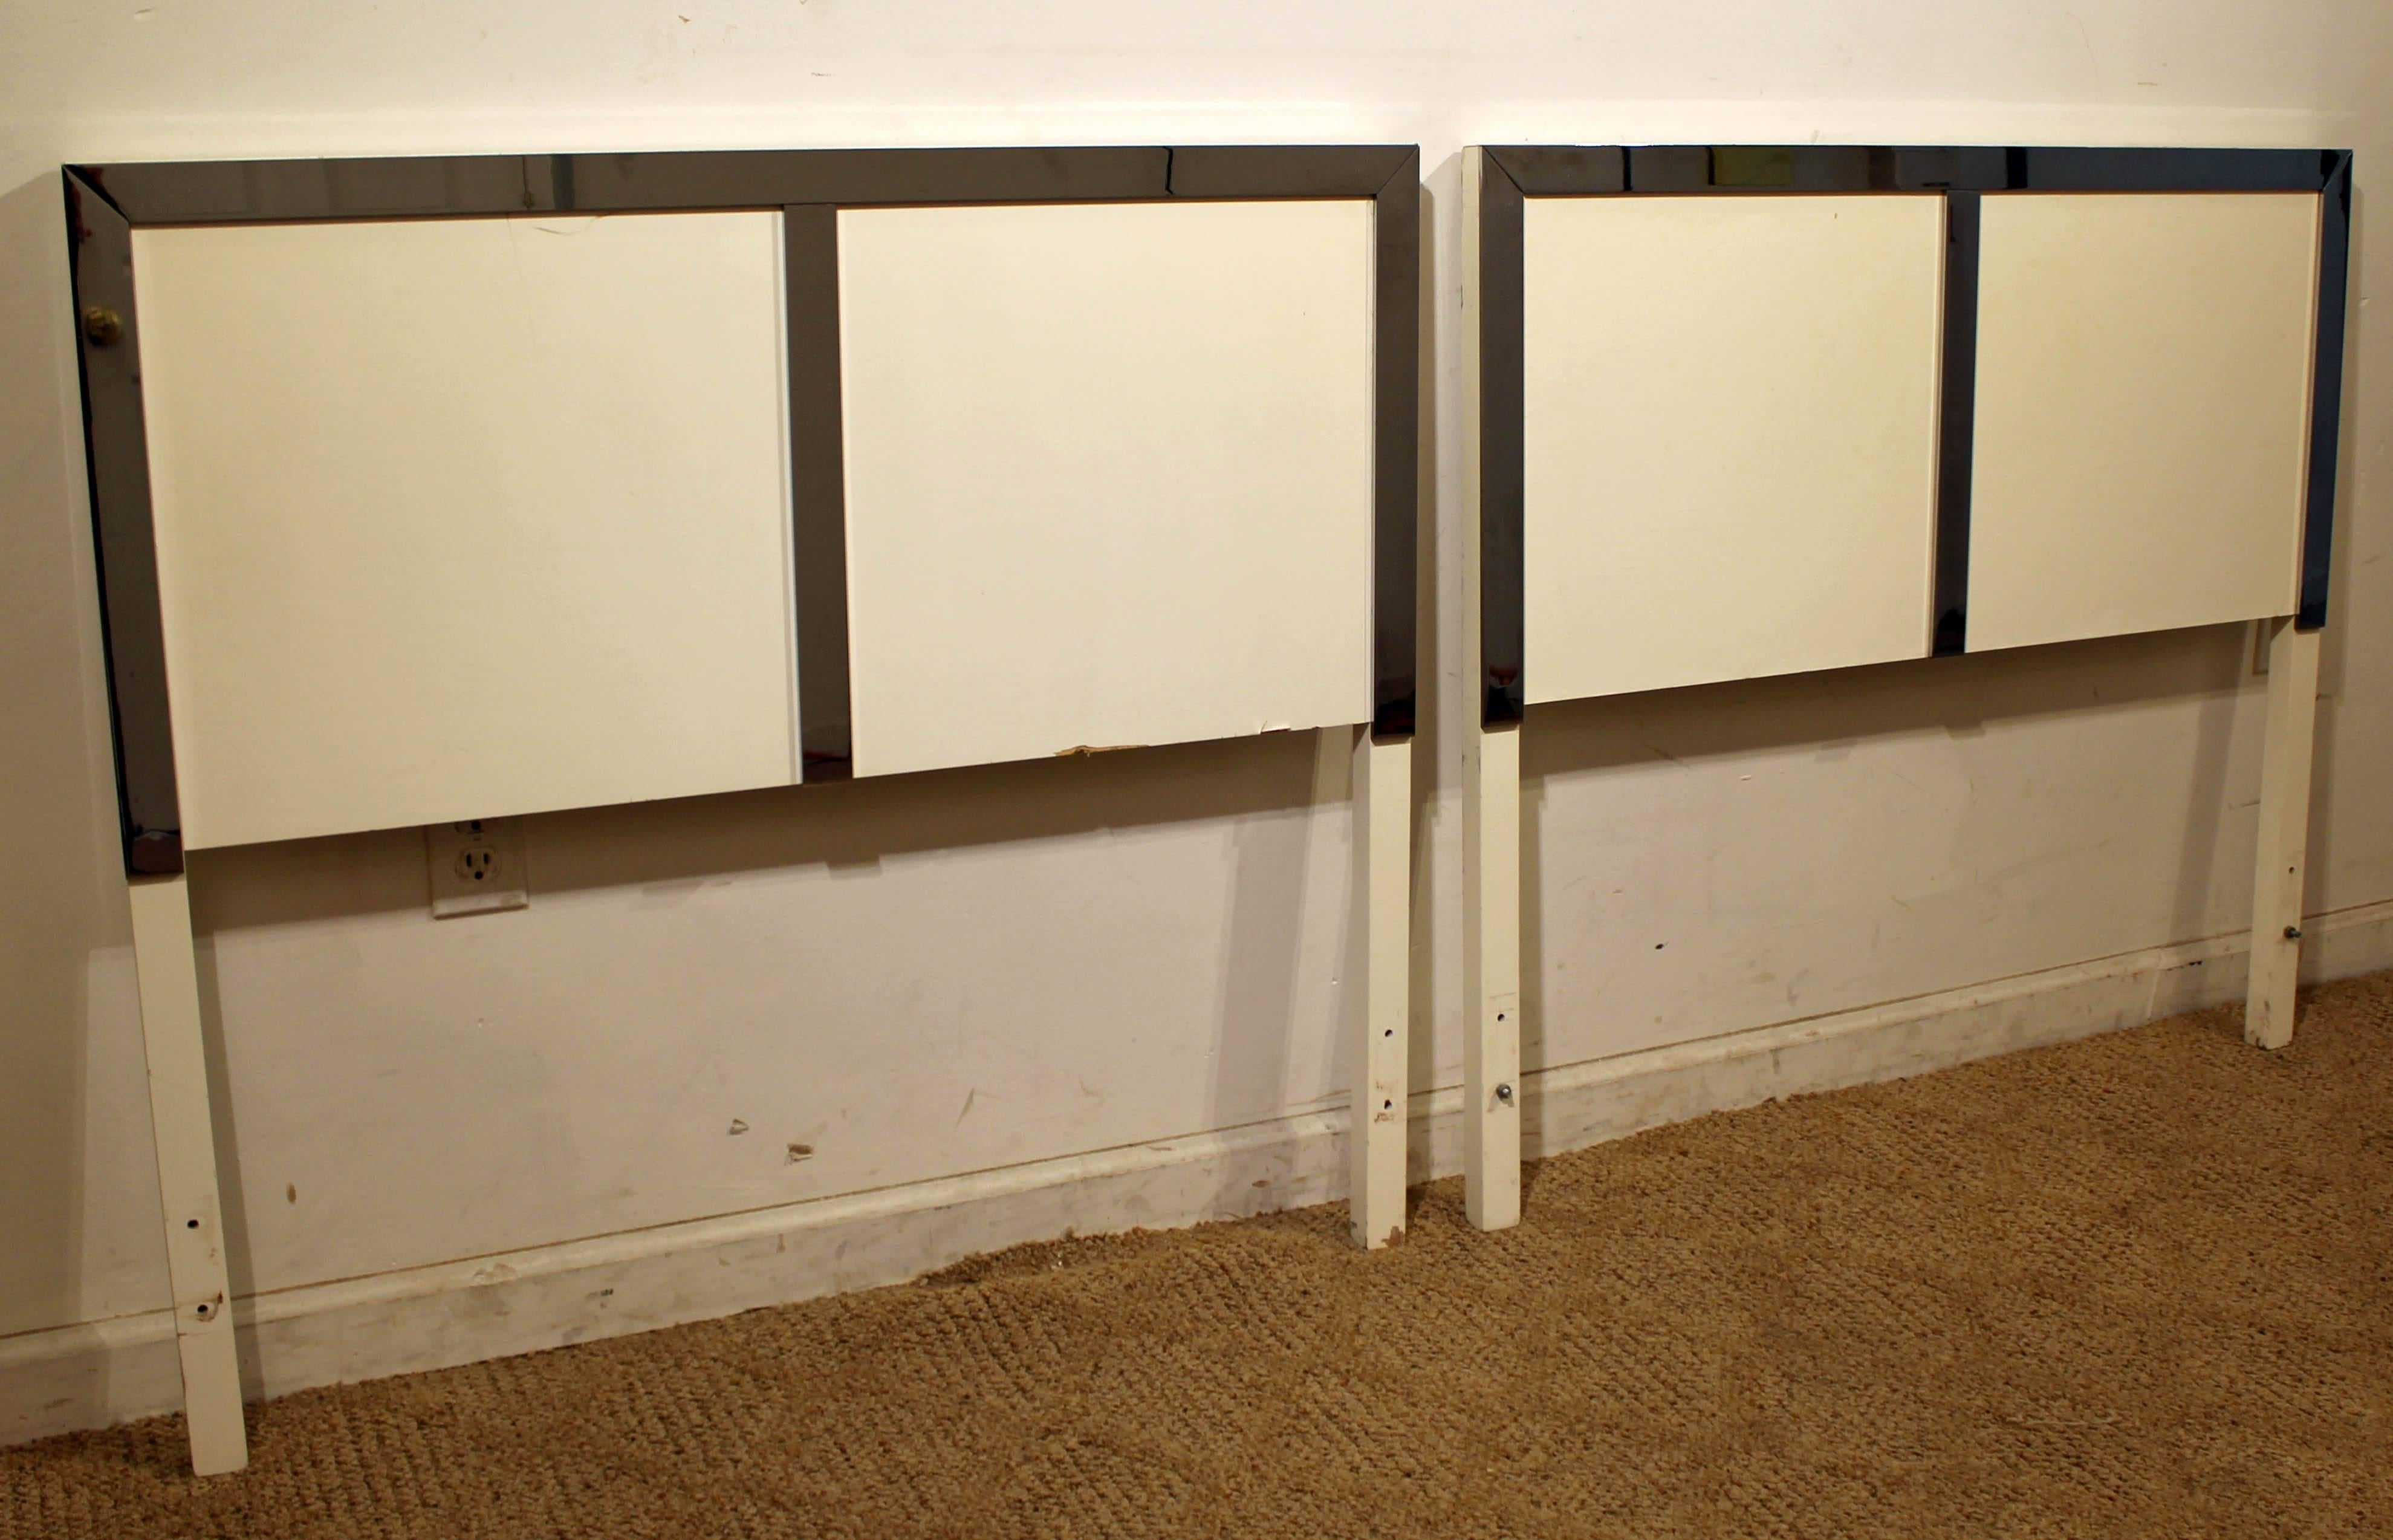 What a find. Offered is a pair of vintage Mid-Century Modern twin size headboards featuring chrome trim. This set does not include rails or a foot boards. They are not signed.

Dimensions:
38.5